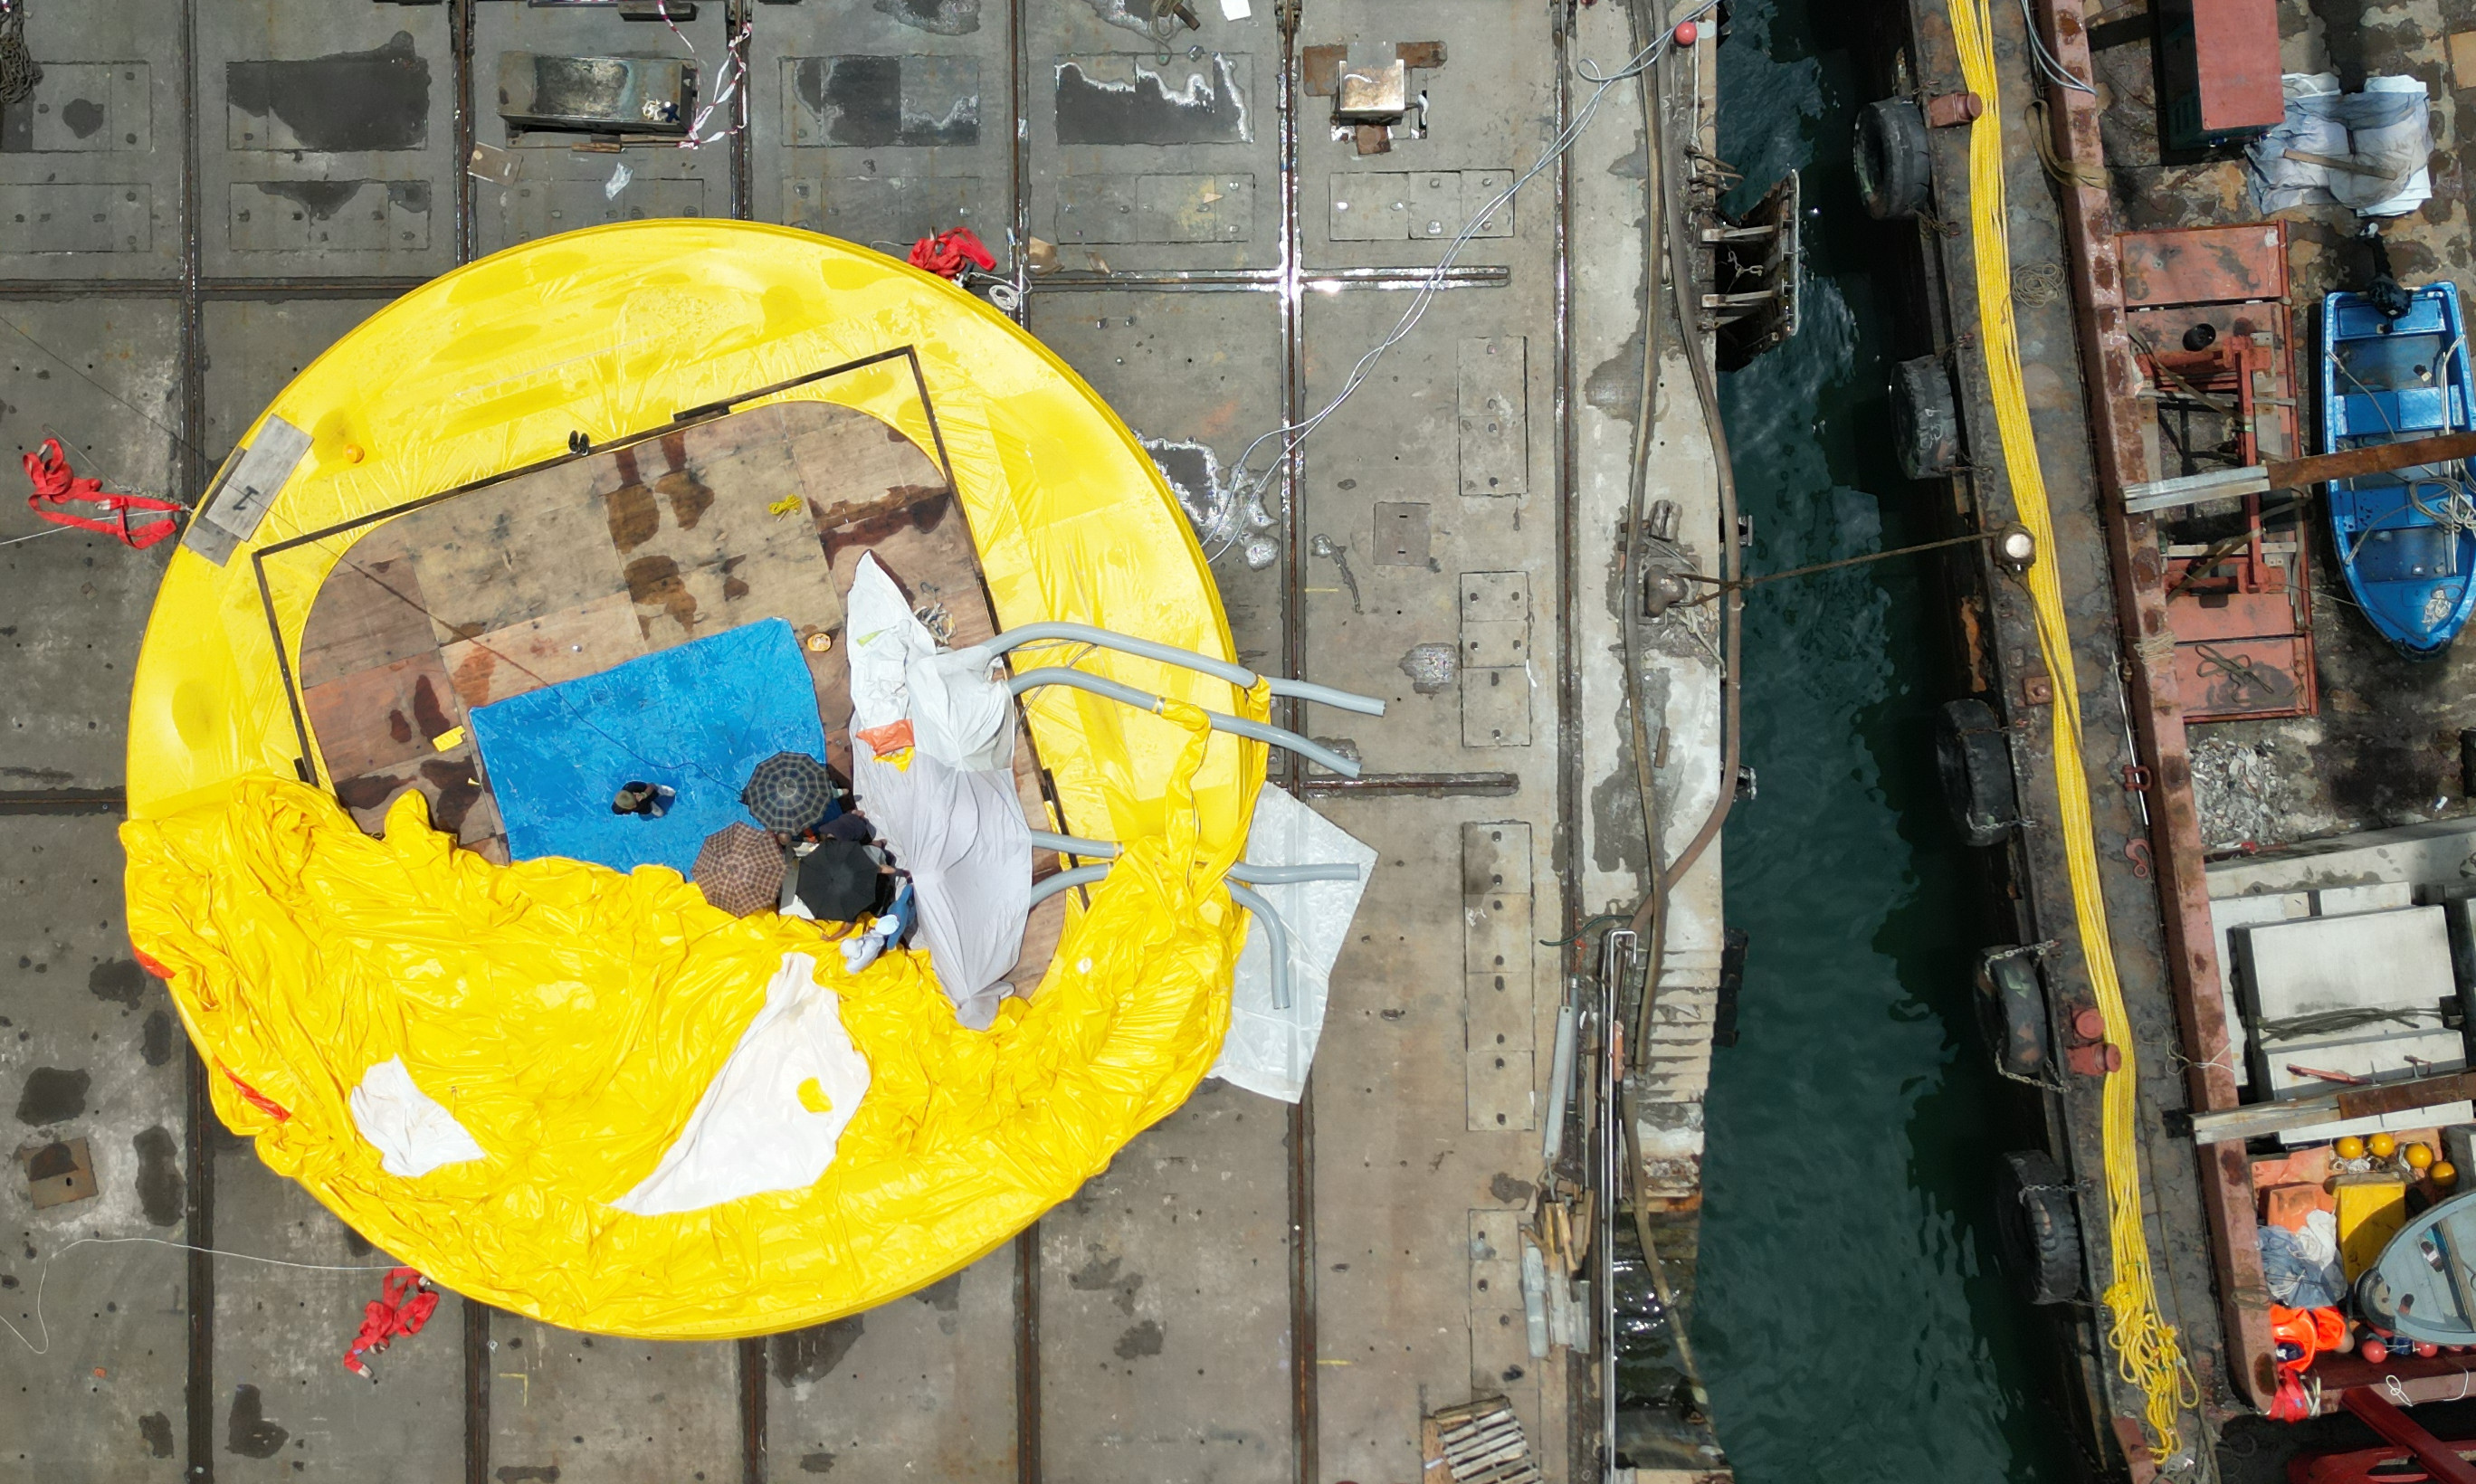 Workers try to repair the deflated giant rubber duck at a shipyard in Tsing Yi. Photo: Sam Tsang